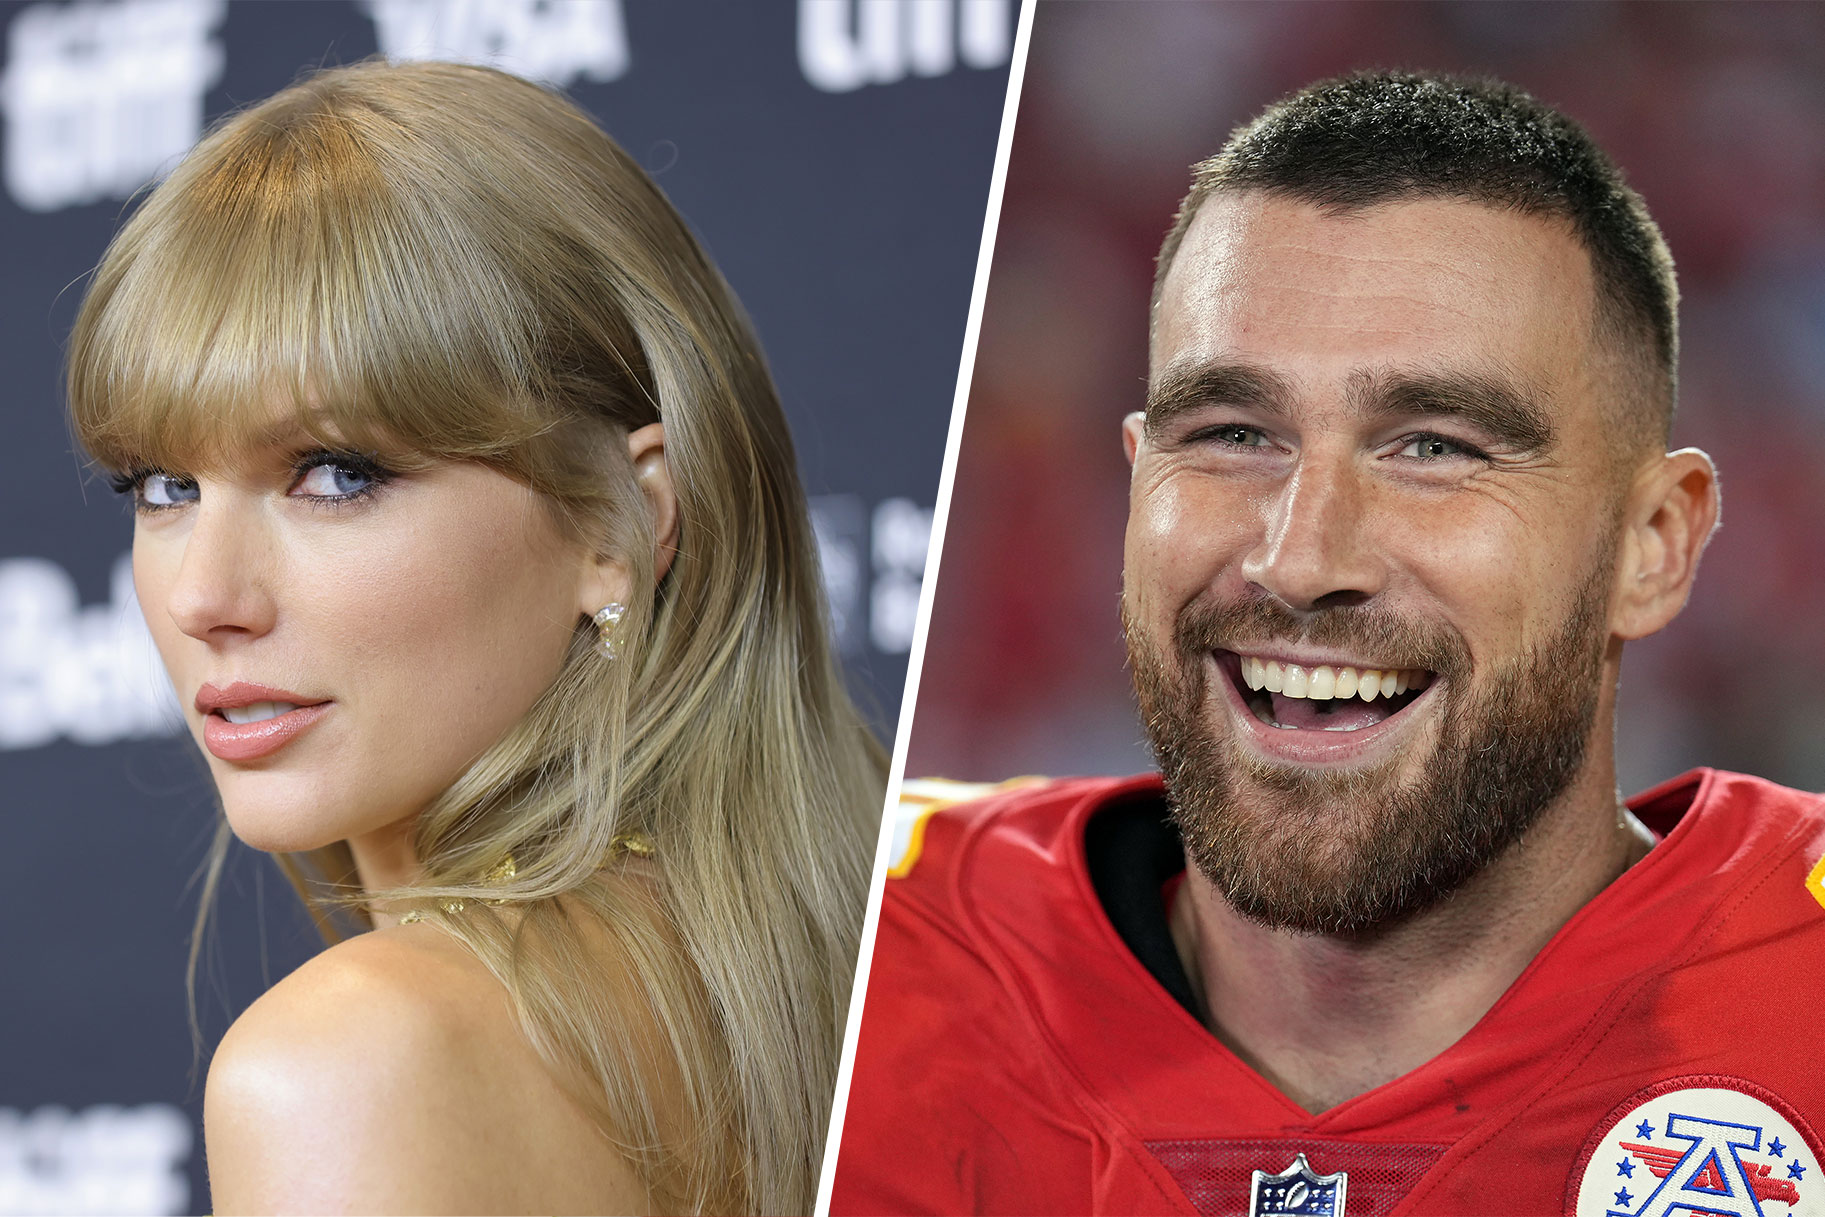 Breaking news : NFL sign 2 years contract worth $ 65m with Taylor swift .. She will be singing NFL National Anthem " Patrick mahomes congratulate Travis and girlfriend 